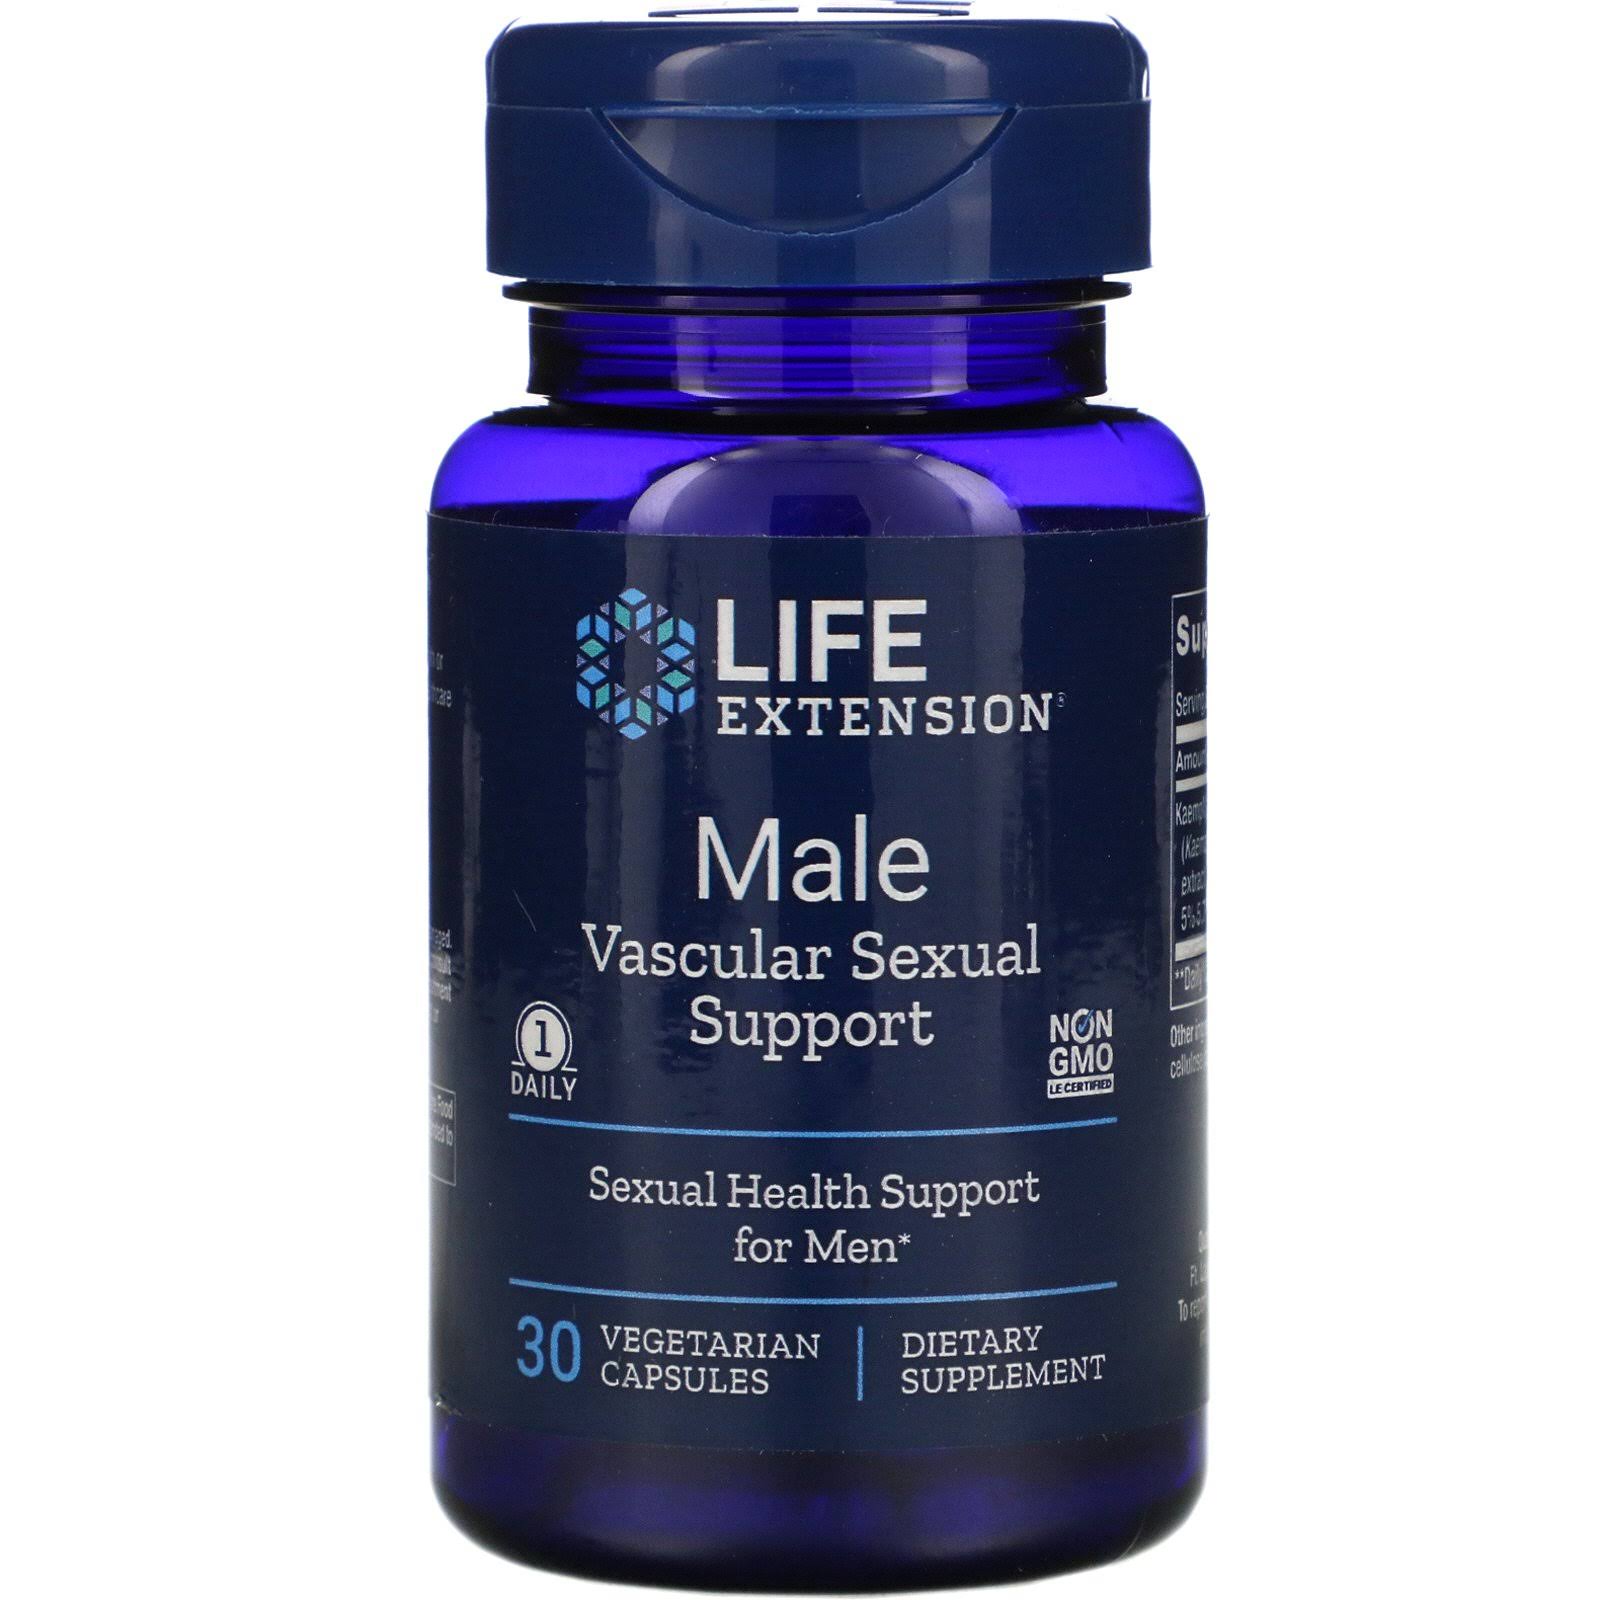 Life Extension Male Vascular Sexual Support - 30 Vegetarian Capsules